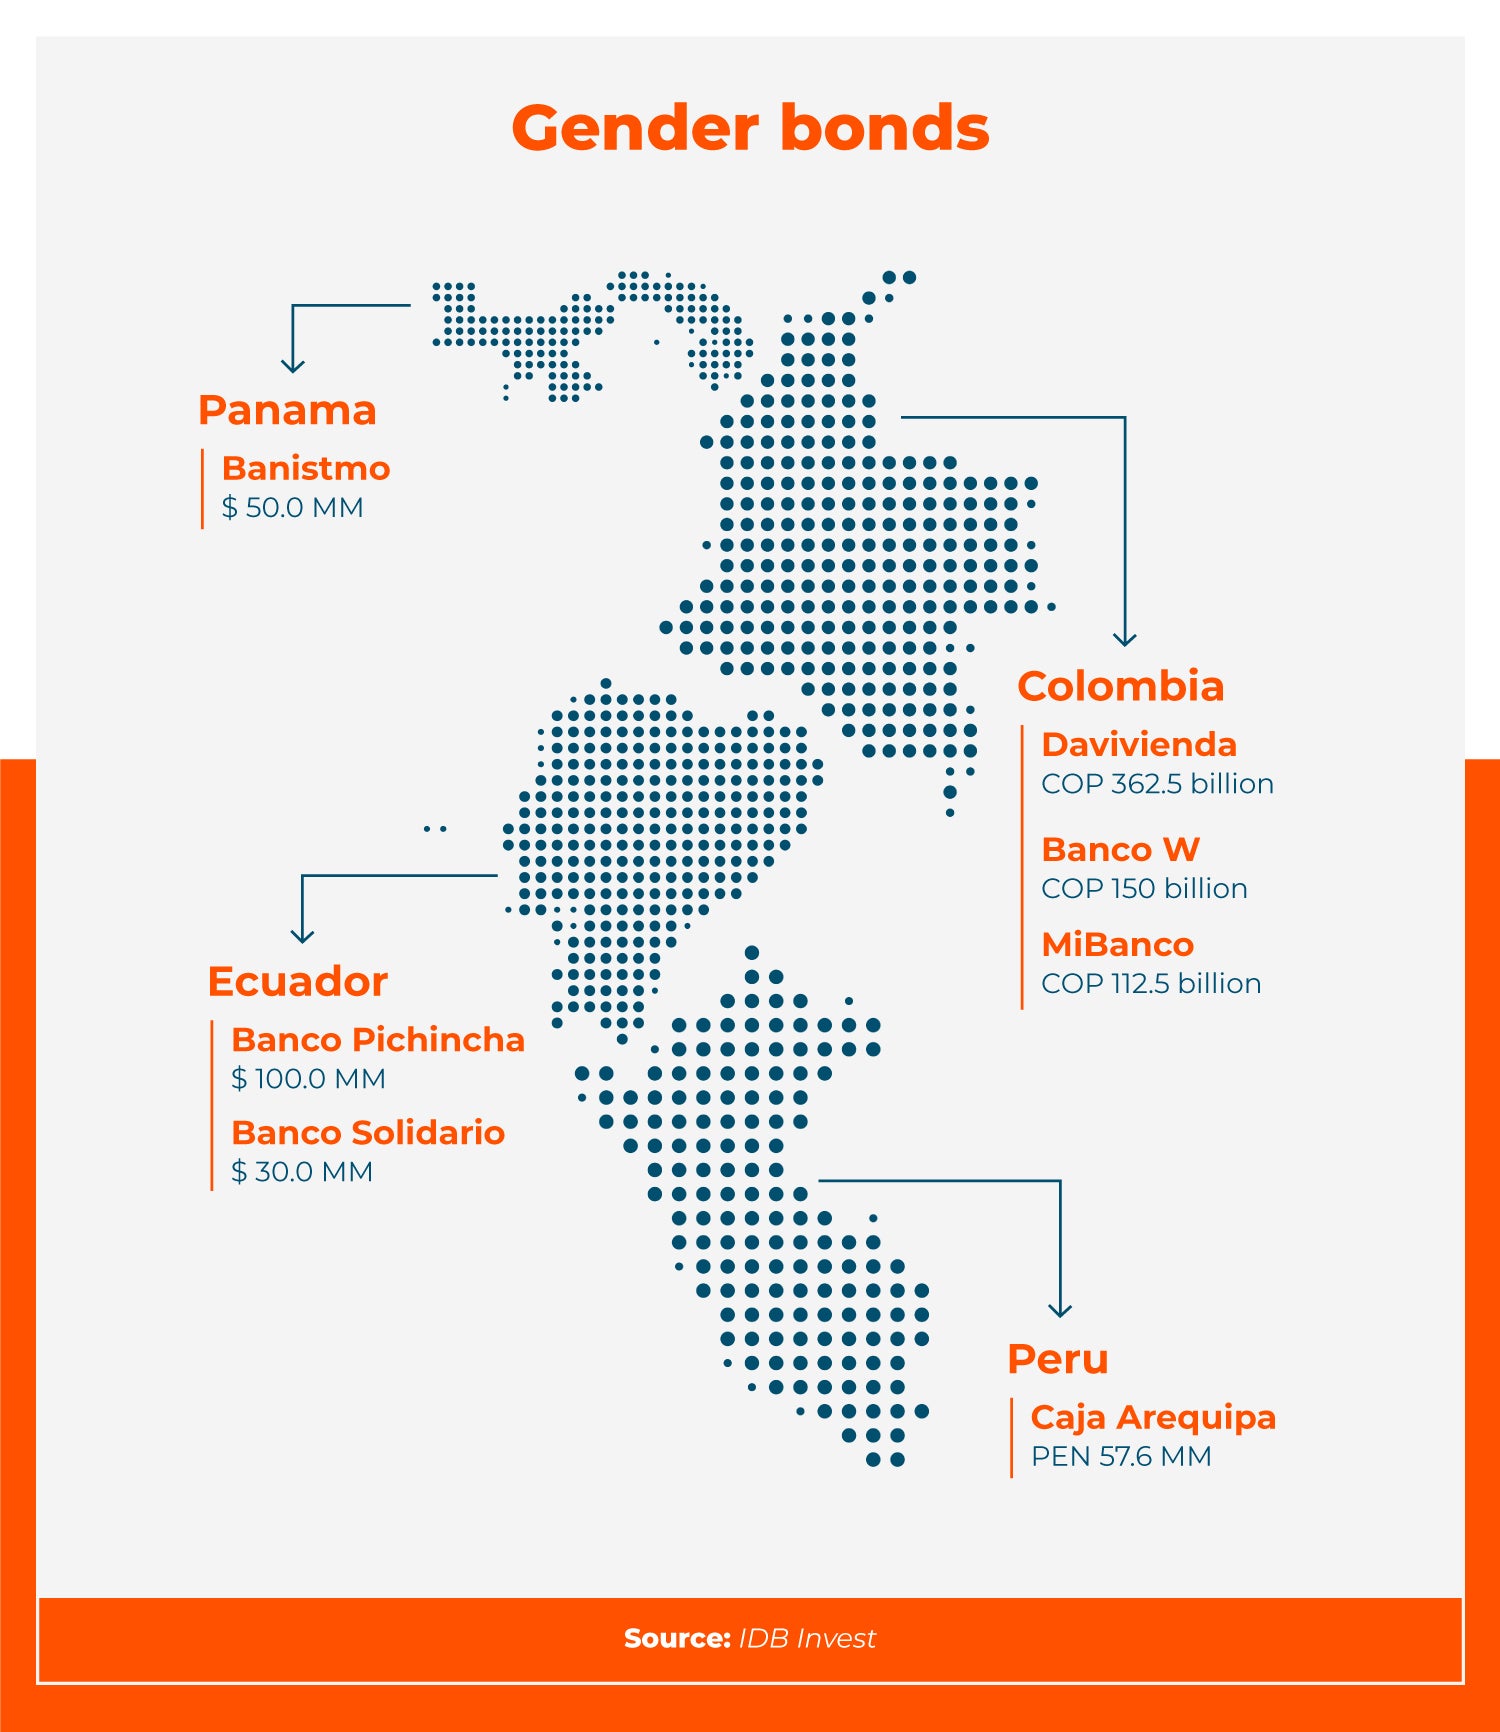 Map of Gender Bonds in LAC